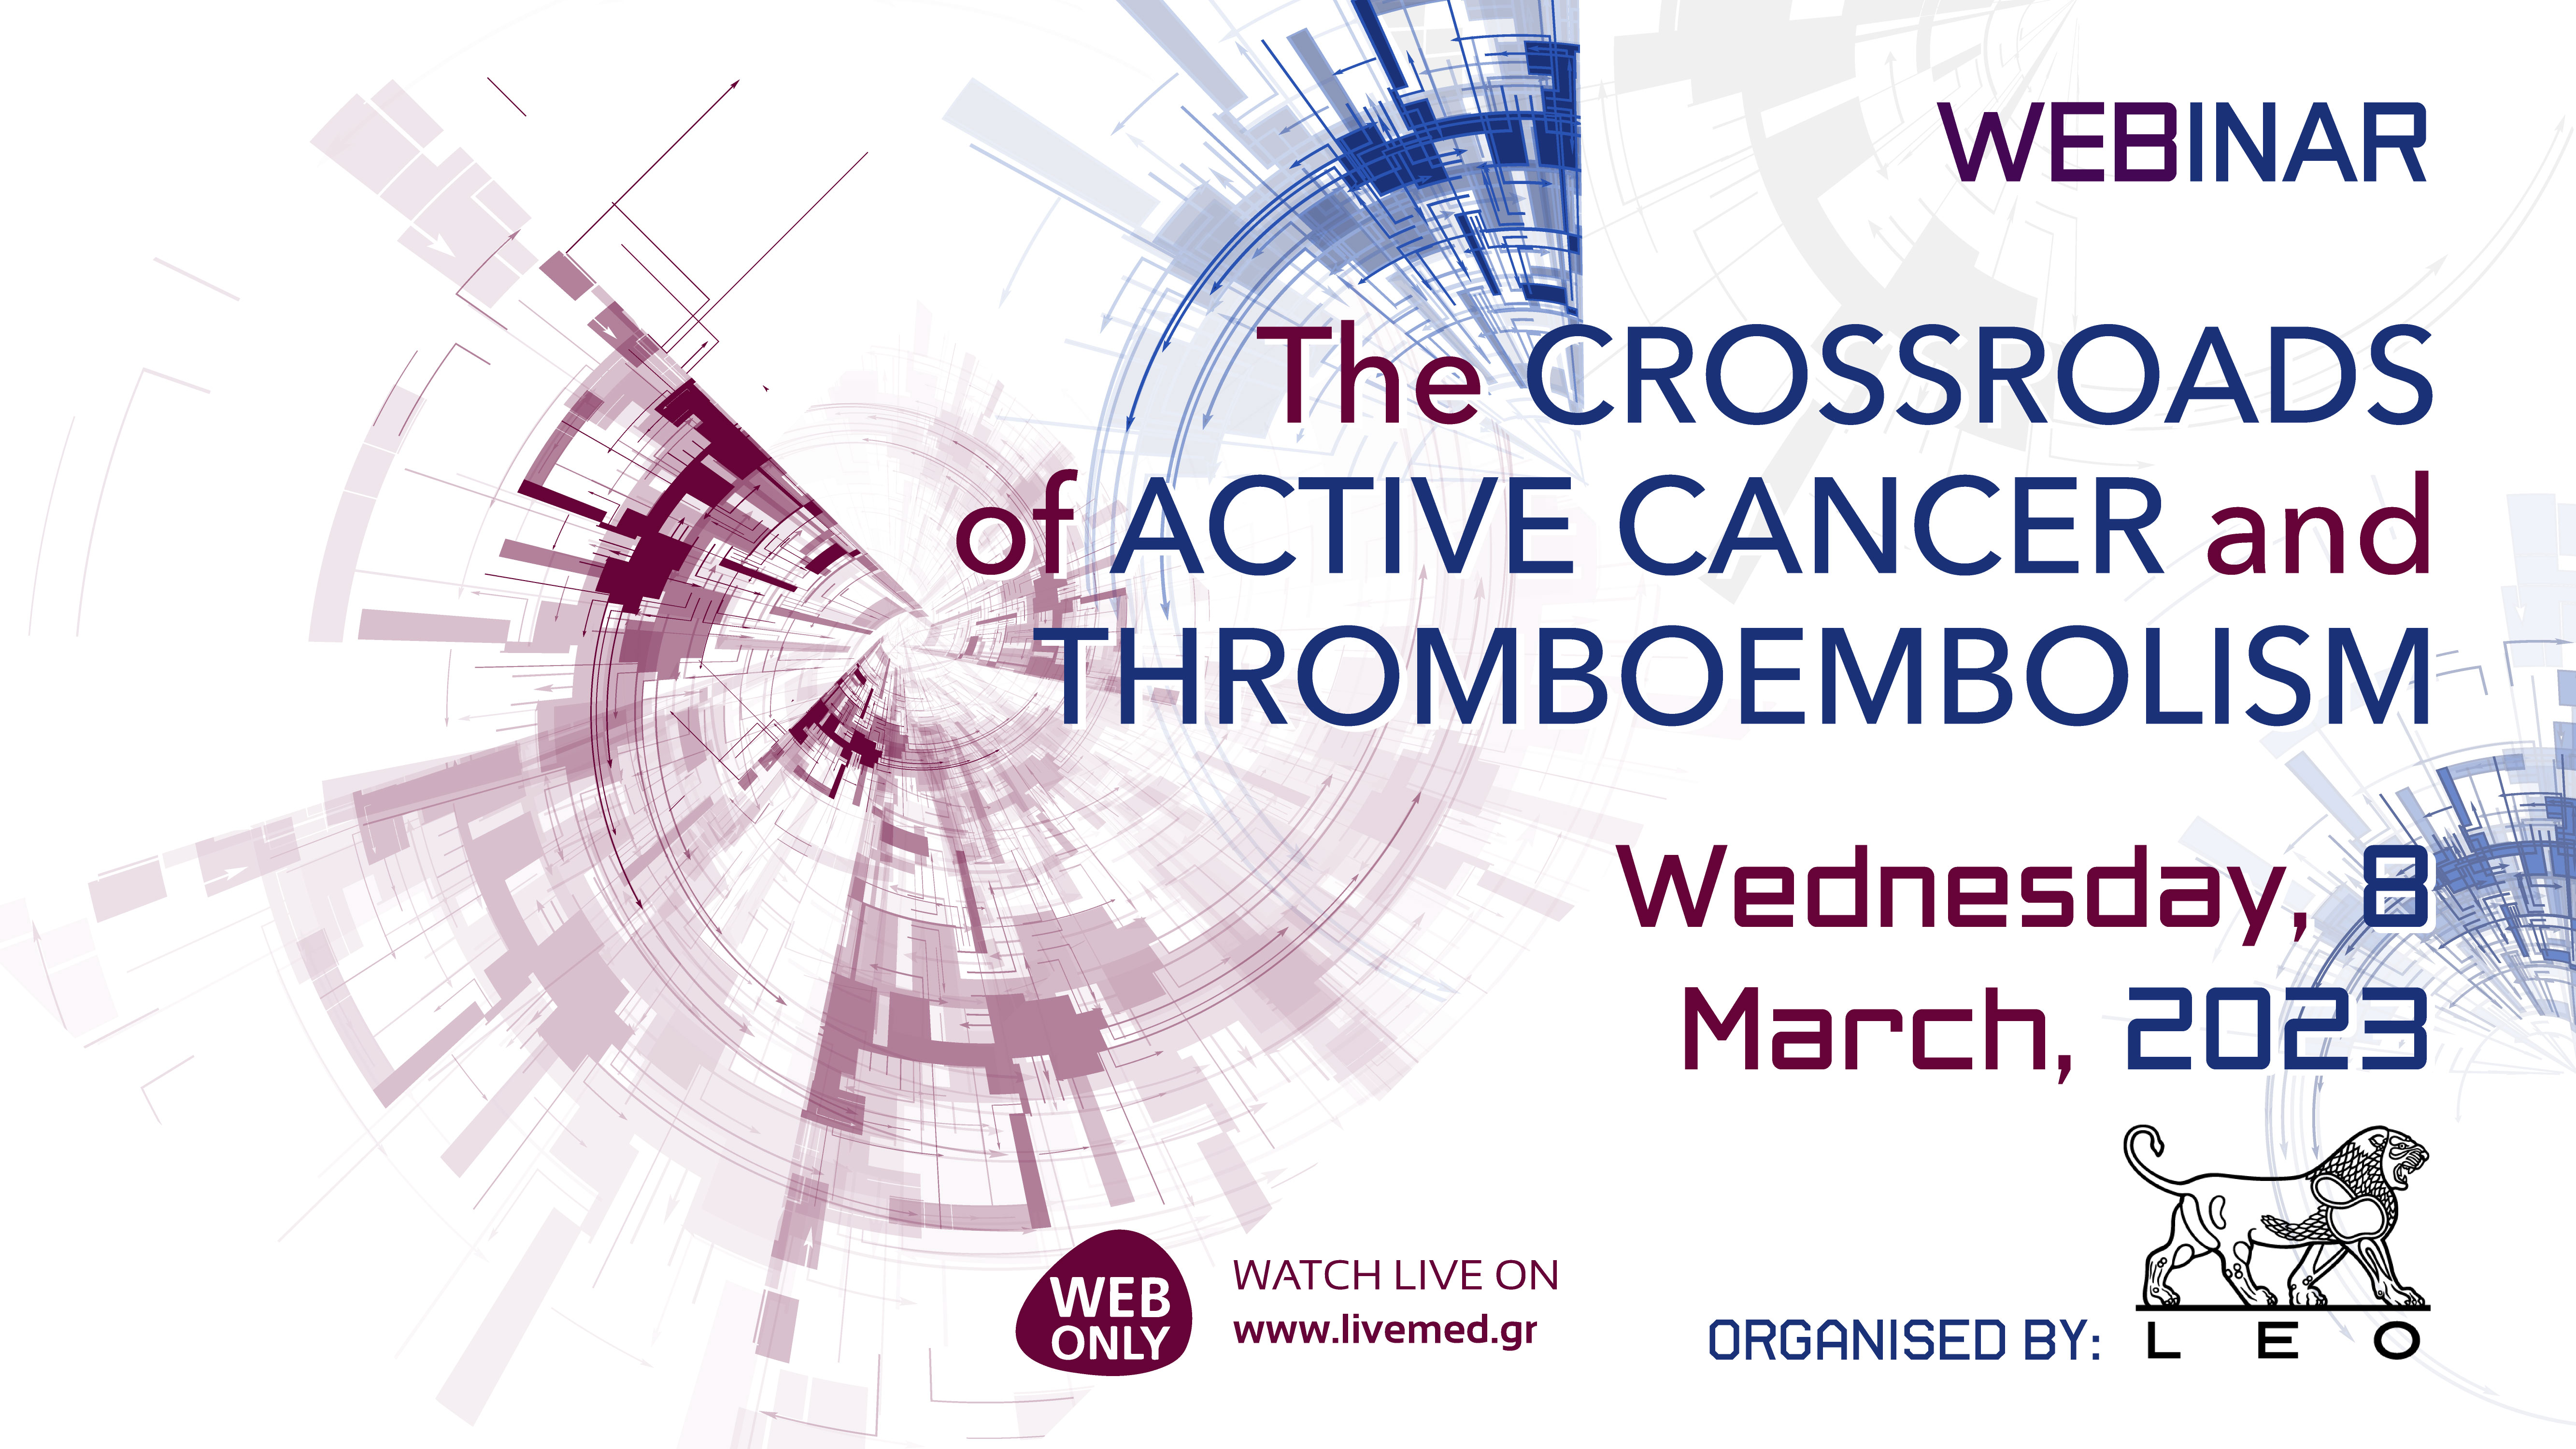 The crossroads of active cancer and thromboembolism